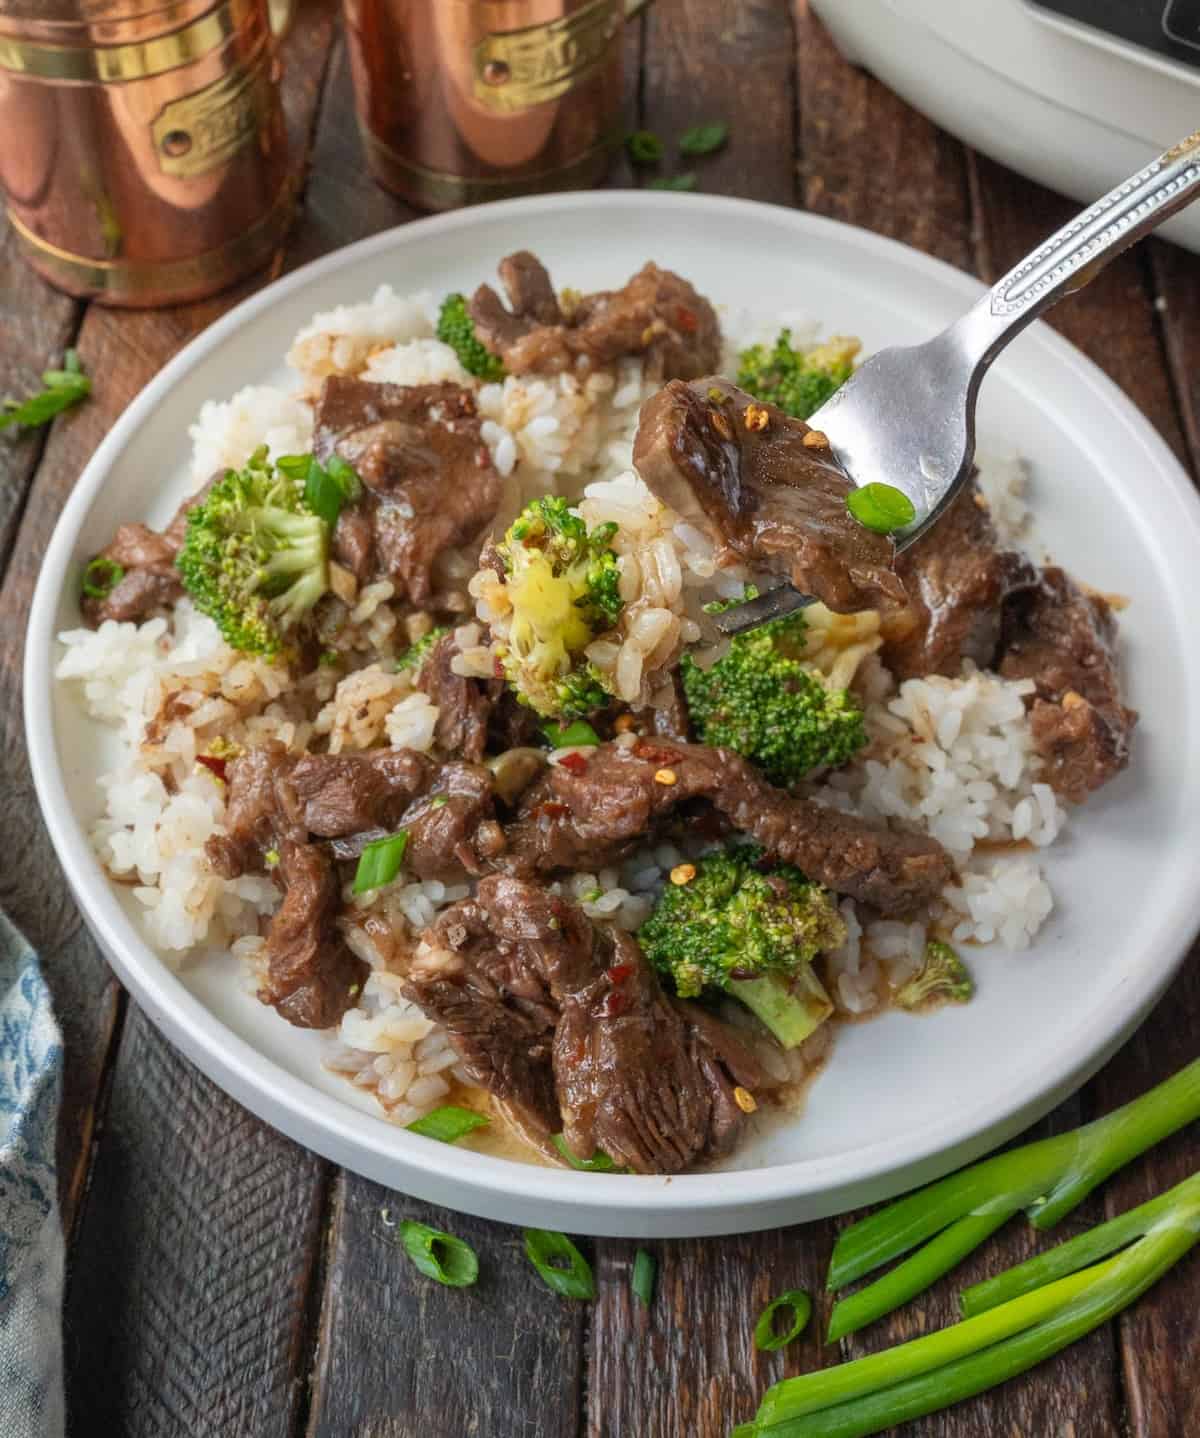 Shot of a fork picking up a bite of beef and broccoli with rice.